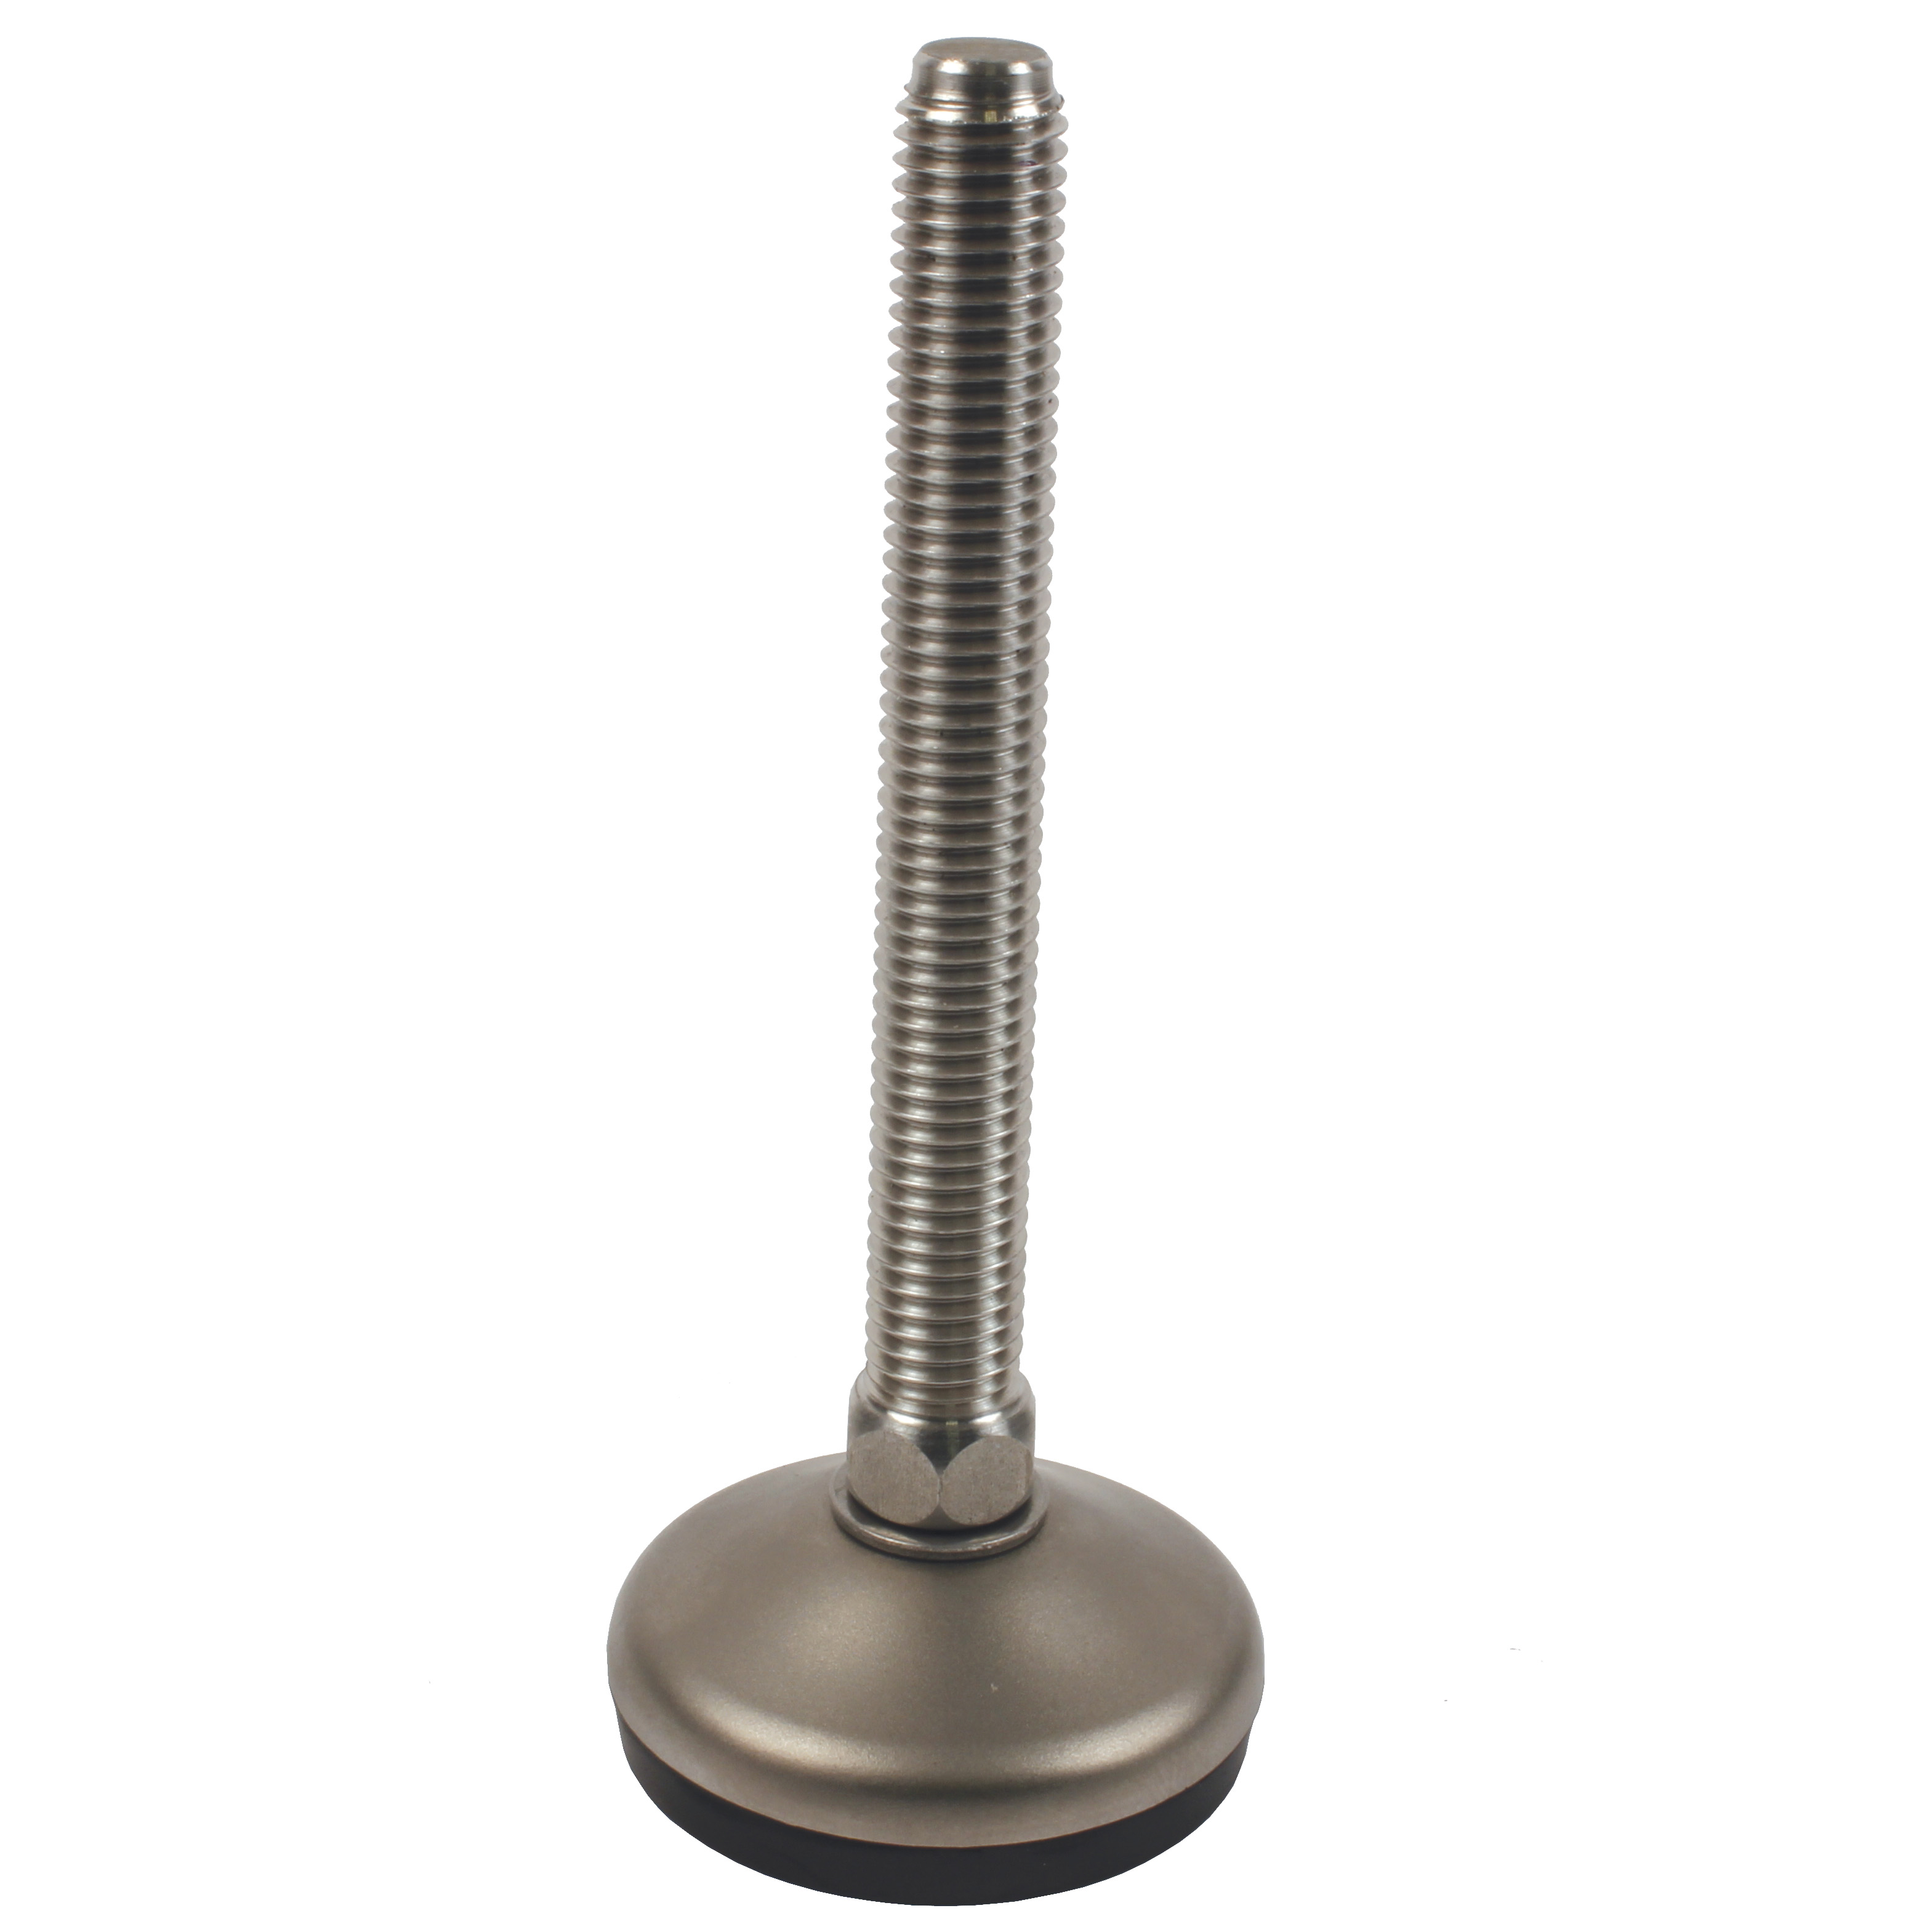 Articulated levelling foot, pressed base Ø150 - Ø 150 - Stainless steel - sanded finish - 